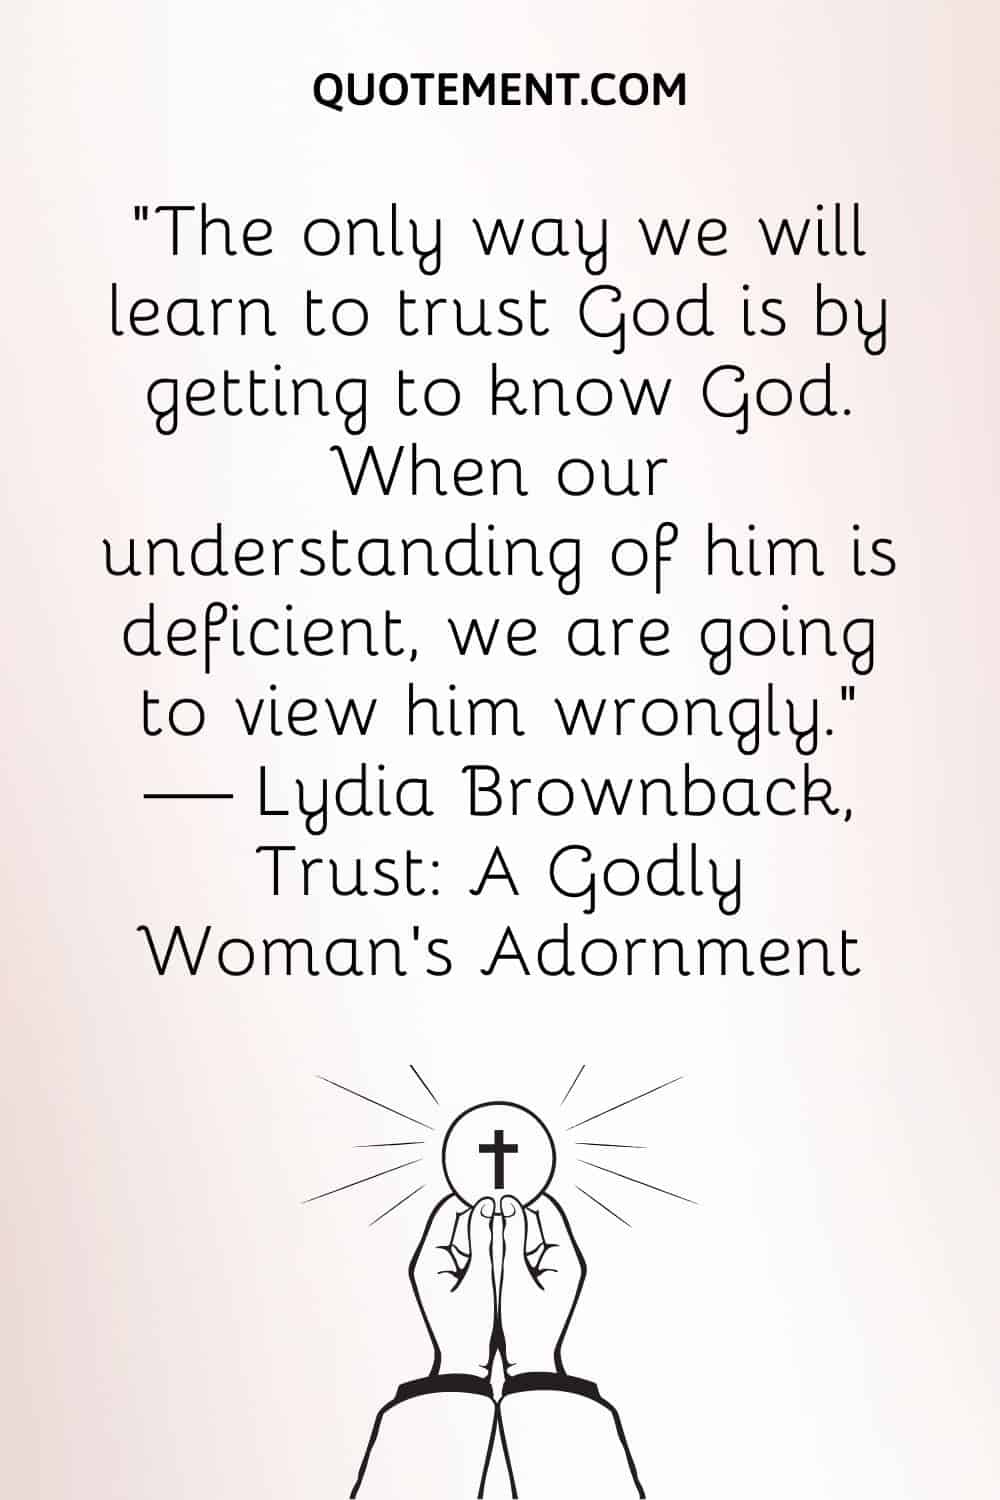 The only way we will learn to trust God is by getting to know God